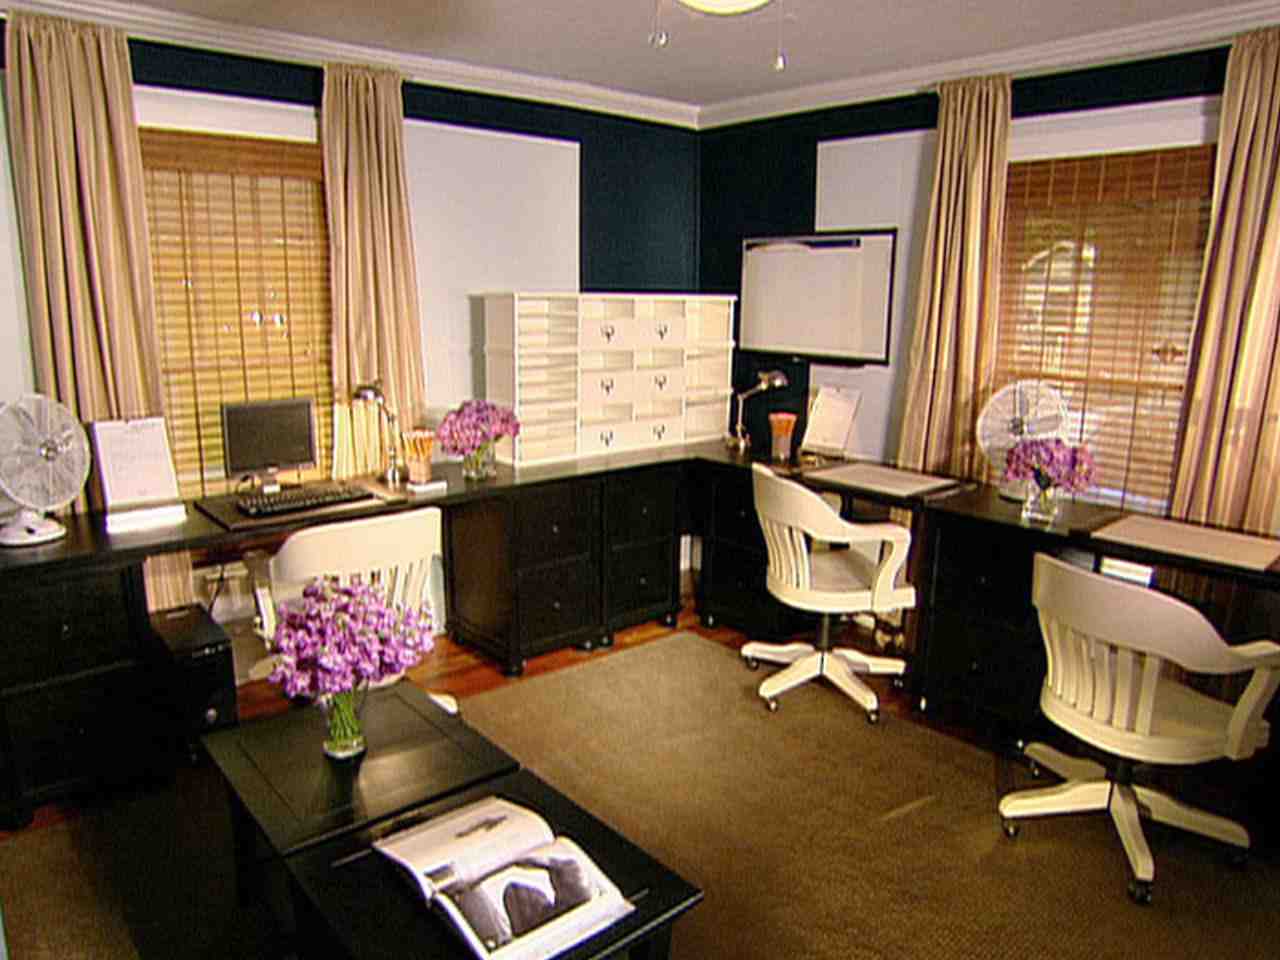 Decorating Ideas for Office at Work - Decor Ideas